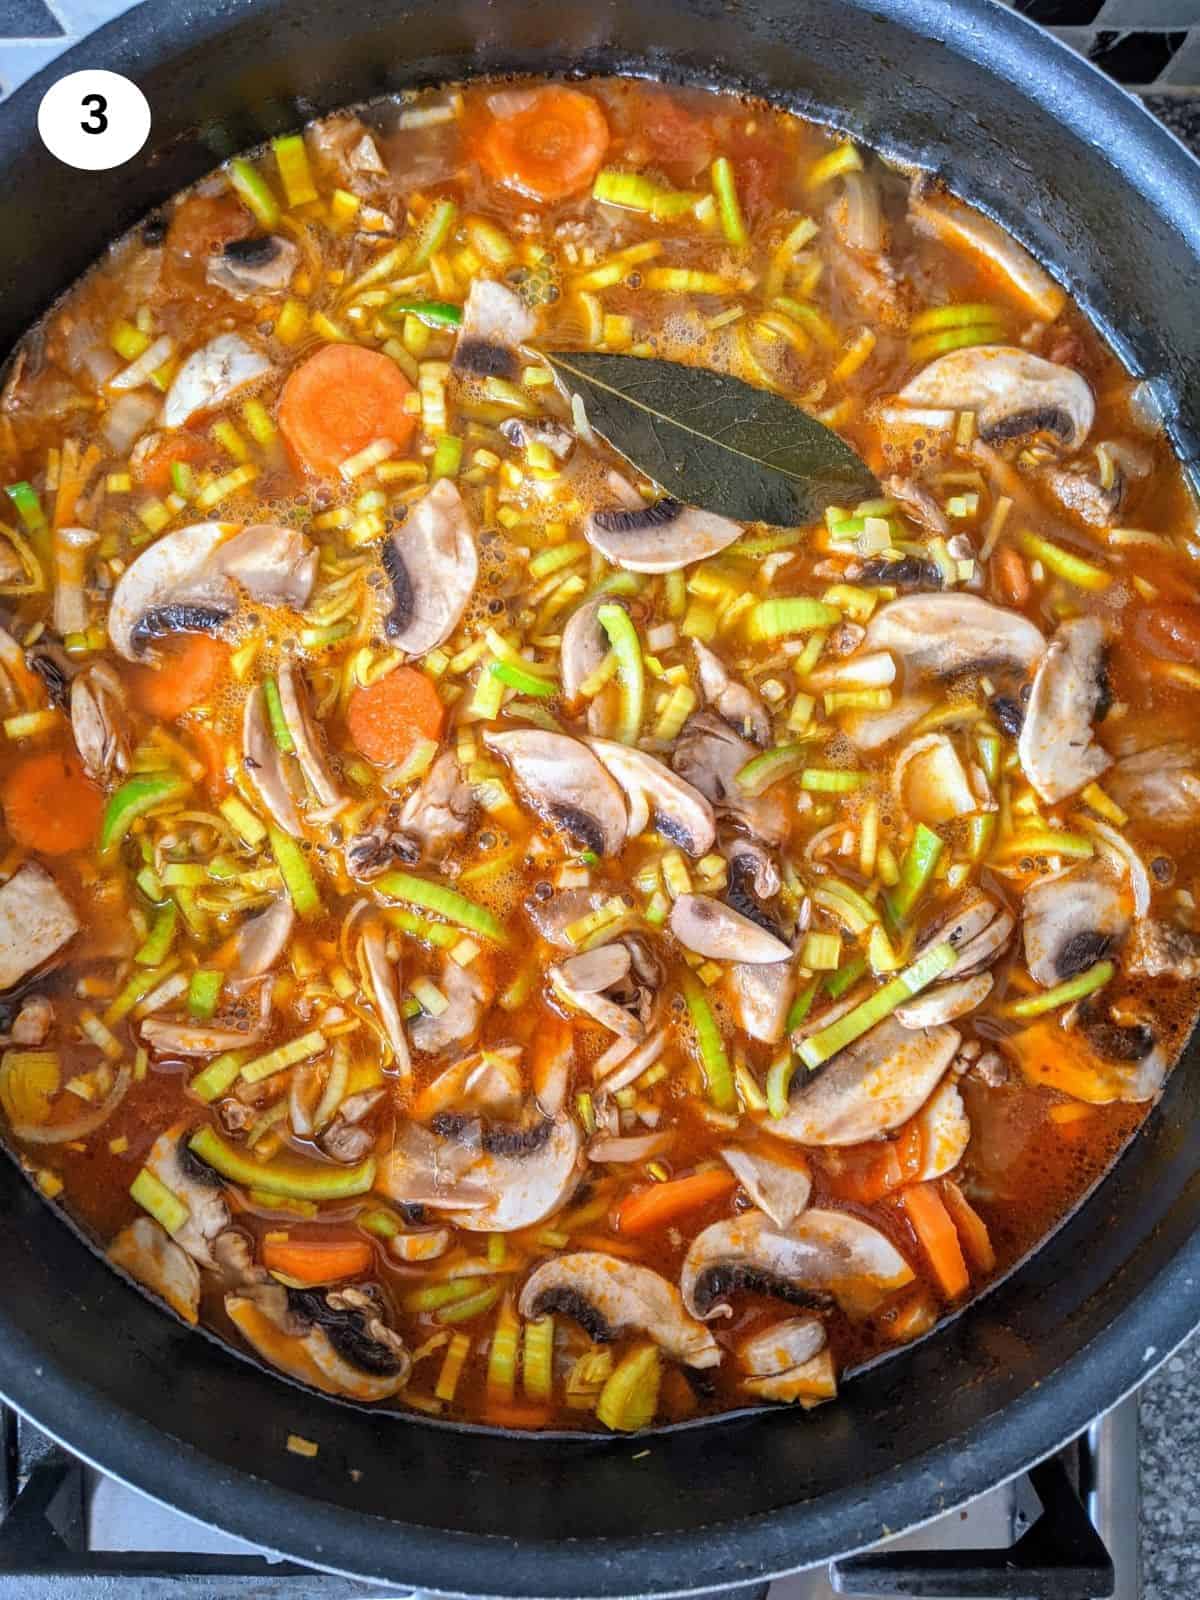 Beef with veggies in the pot